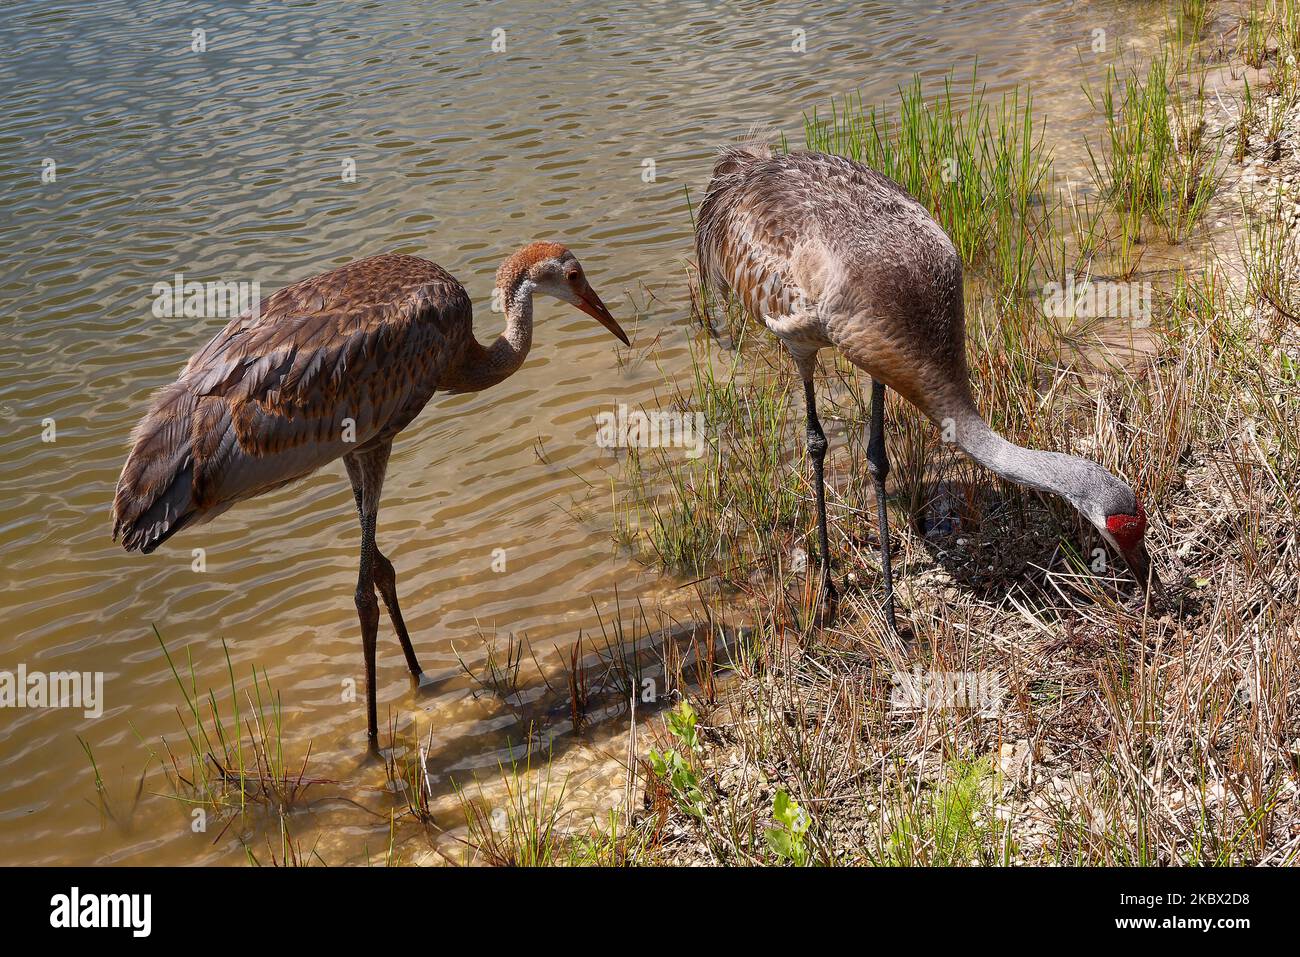 2 Sandhill Cranes, immature, mature, eating, water, very large bird, Grus canadensis, red forehead, tufted rump feathers, long neck, long legs, wildli Stock Photo